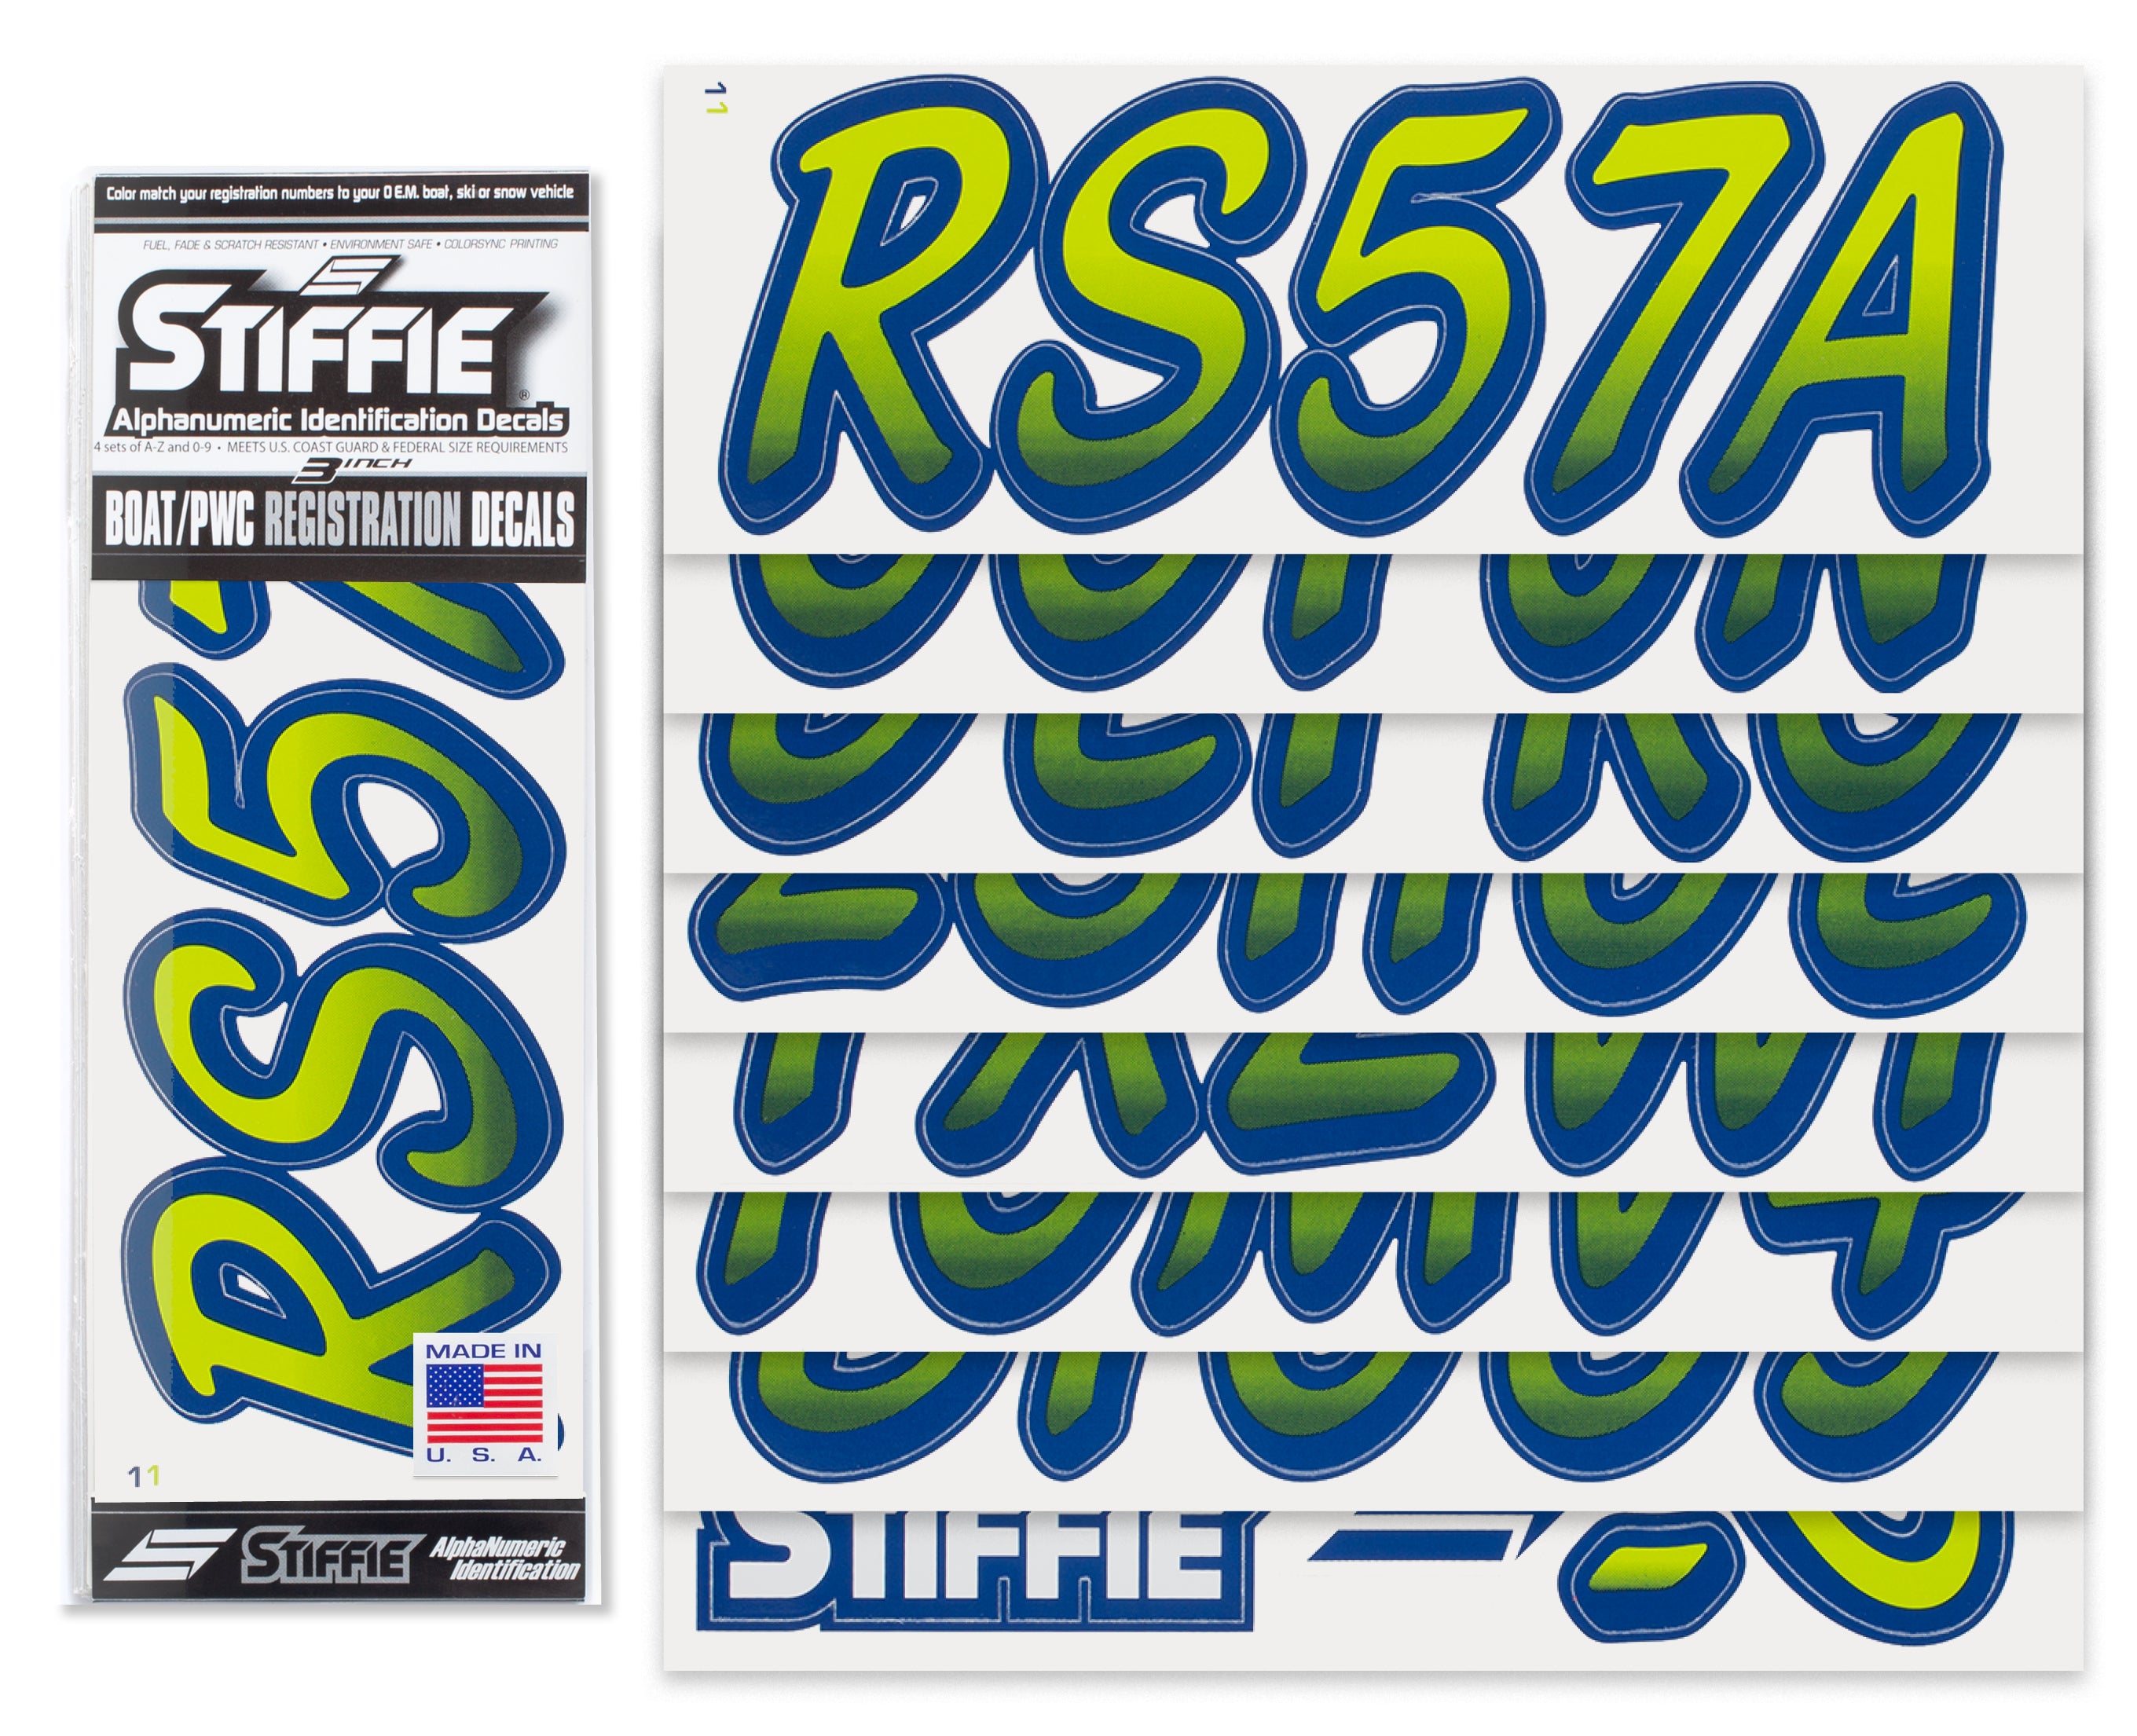 STIFFIE Whipline Atomic Green/Navy 3" Alpha-Numeric Registration Identification Numbers Stickers Decals for Boats & Personal Watercraft